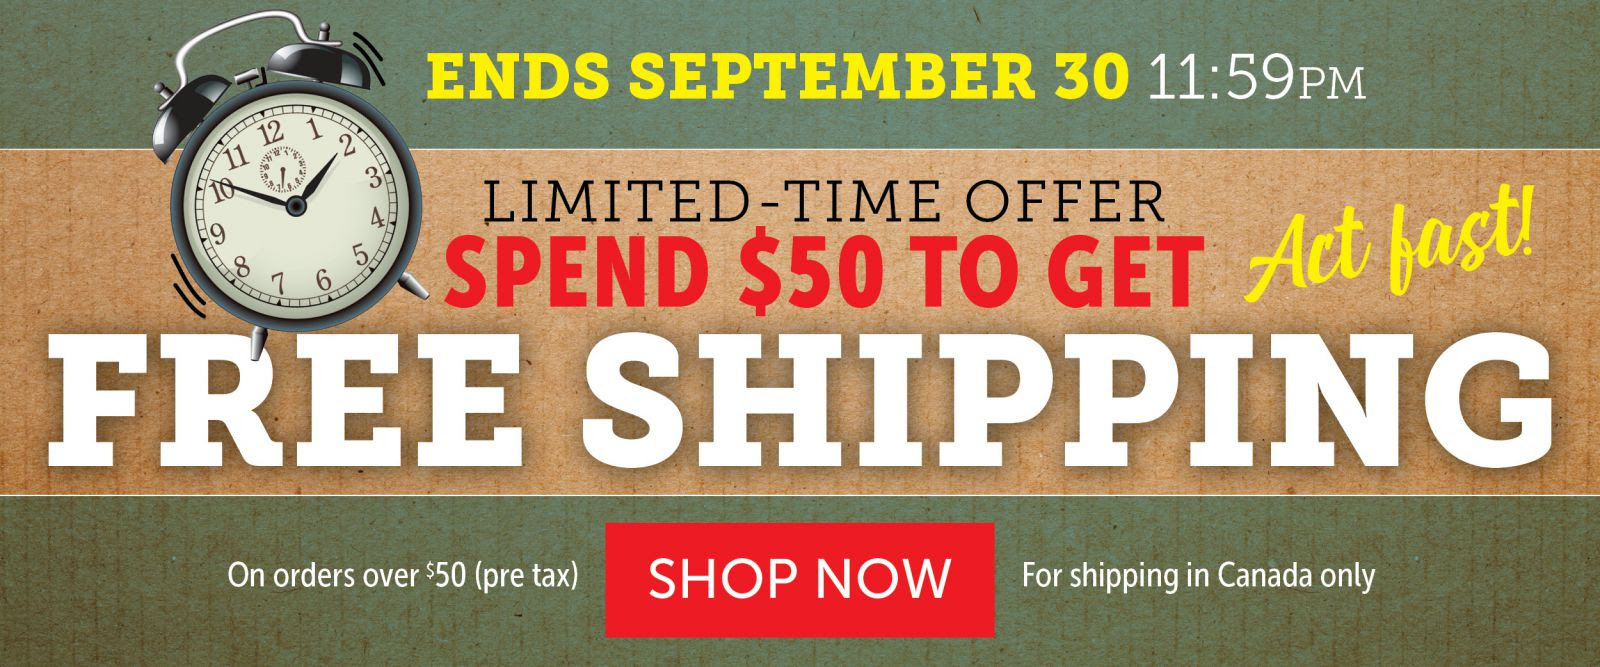 FREE SHIPPING! LIMITED TIME OFFER!